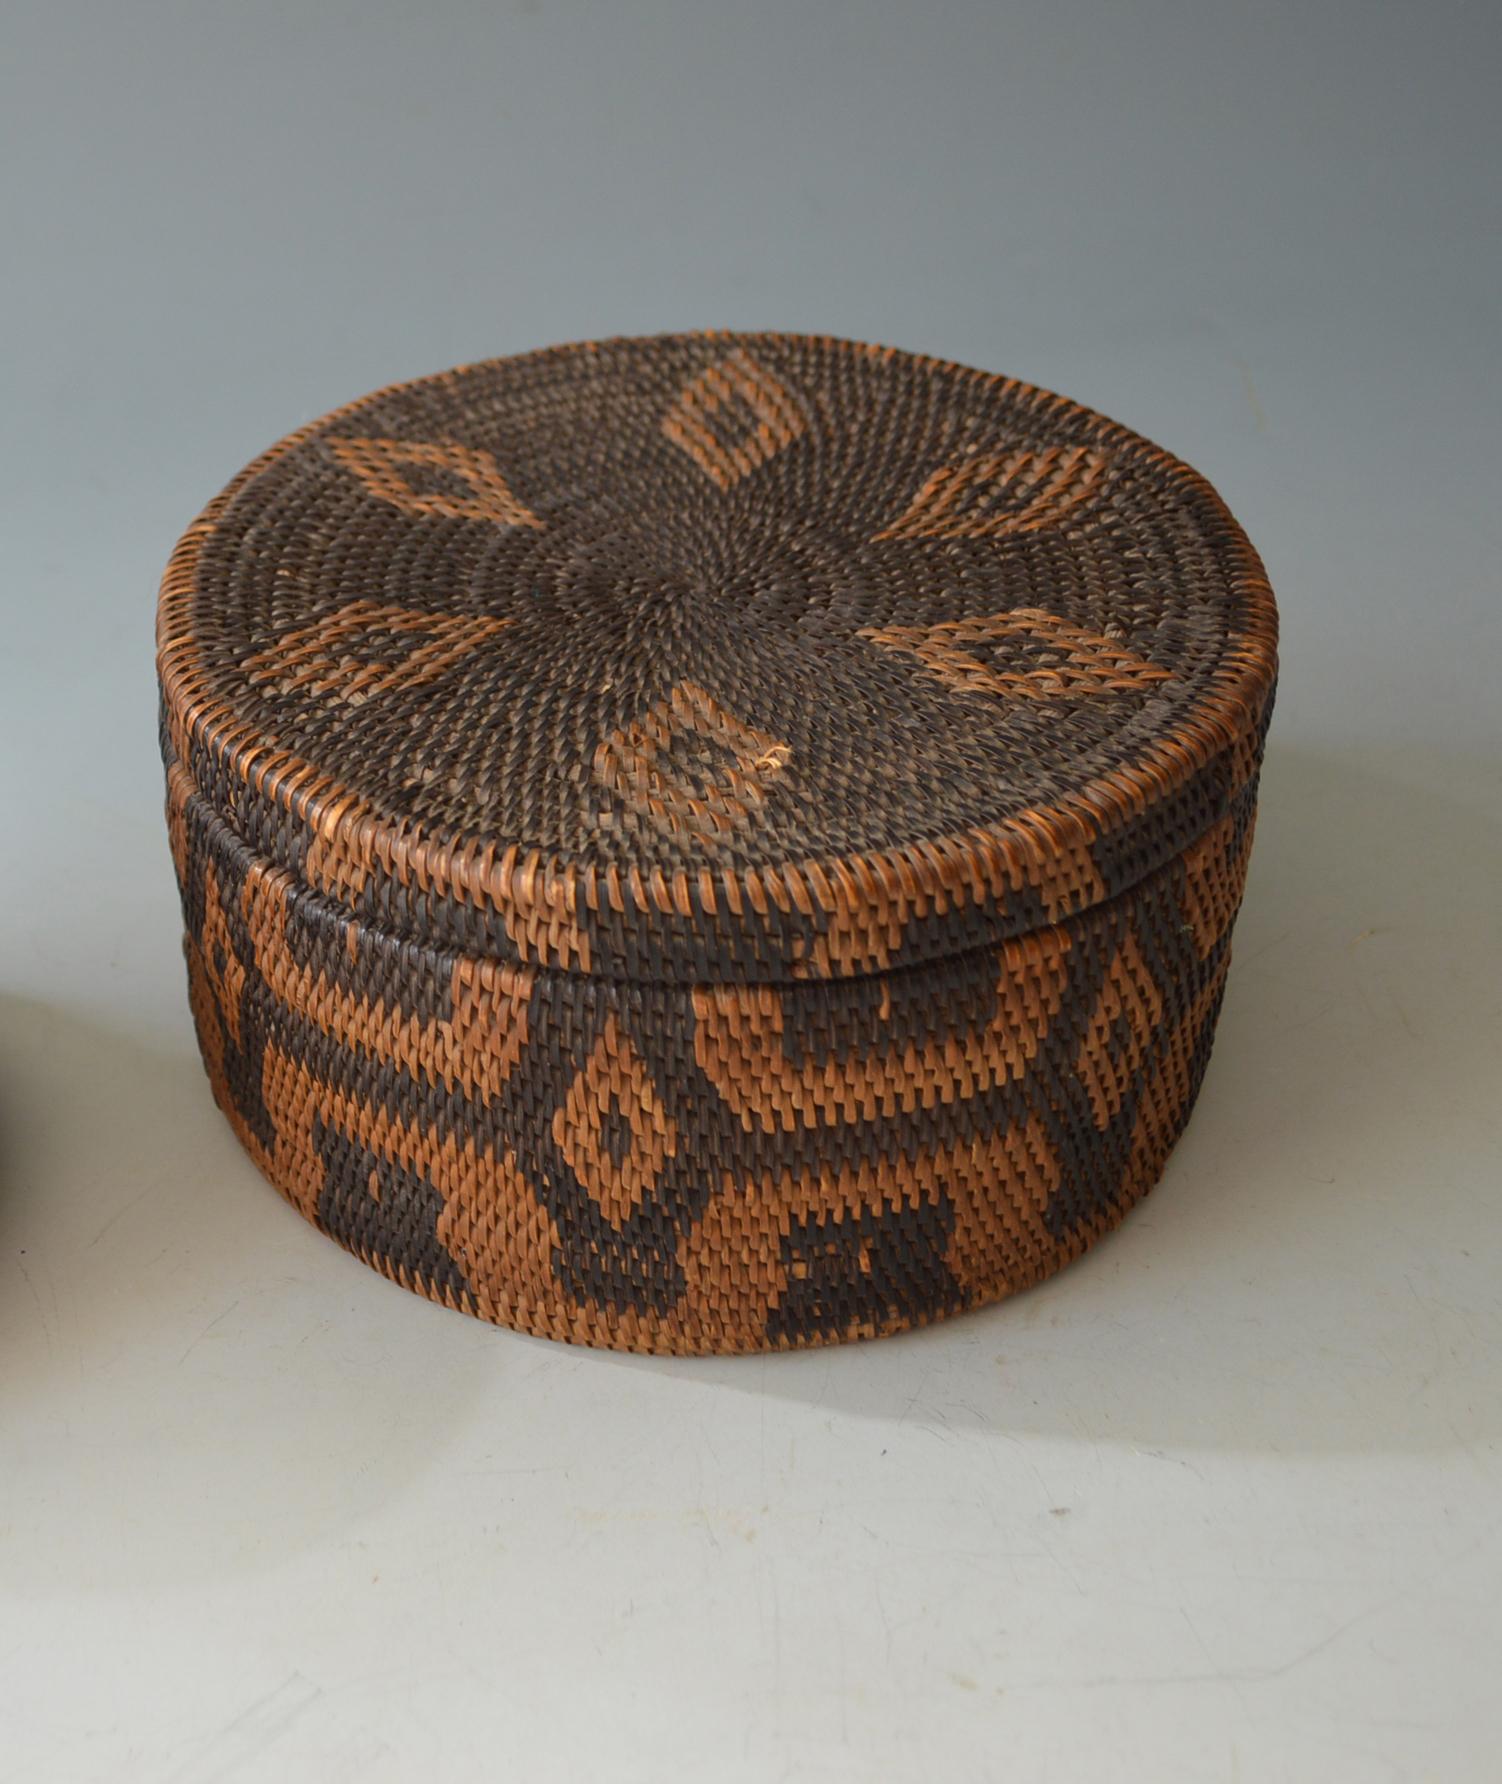 Barotse Basket Zambia

A very finely woven rare early 20th century round basket with cover with geometric and diamond motives

Ba Rotse people Zambia are famed for there high quality and intricate basketry.

